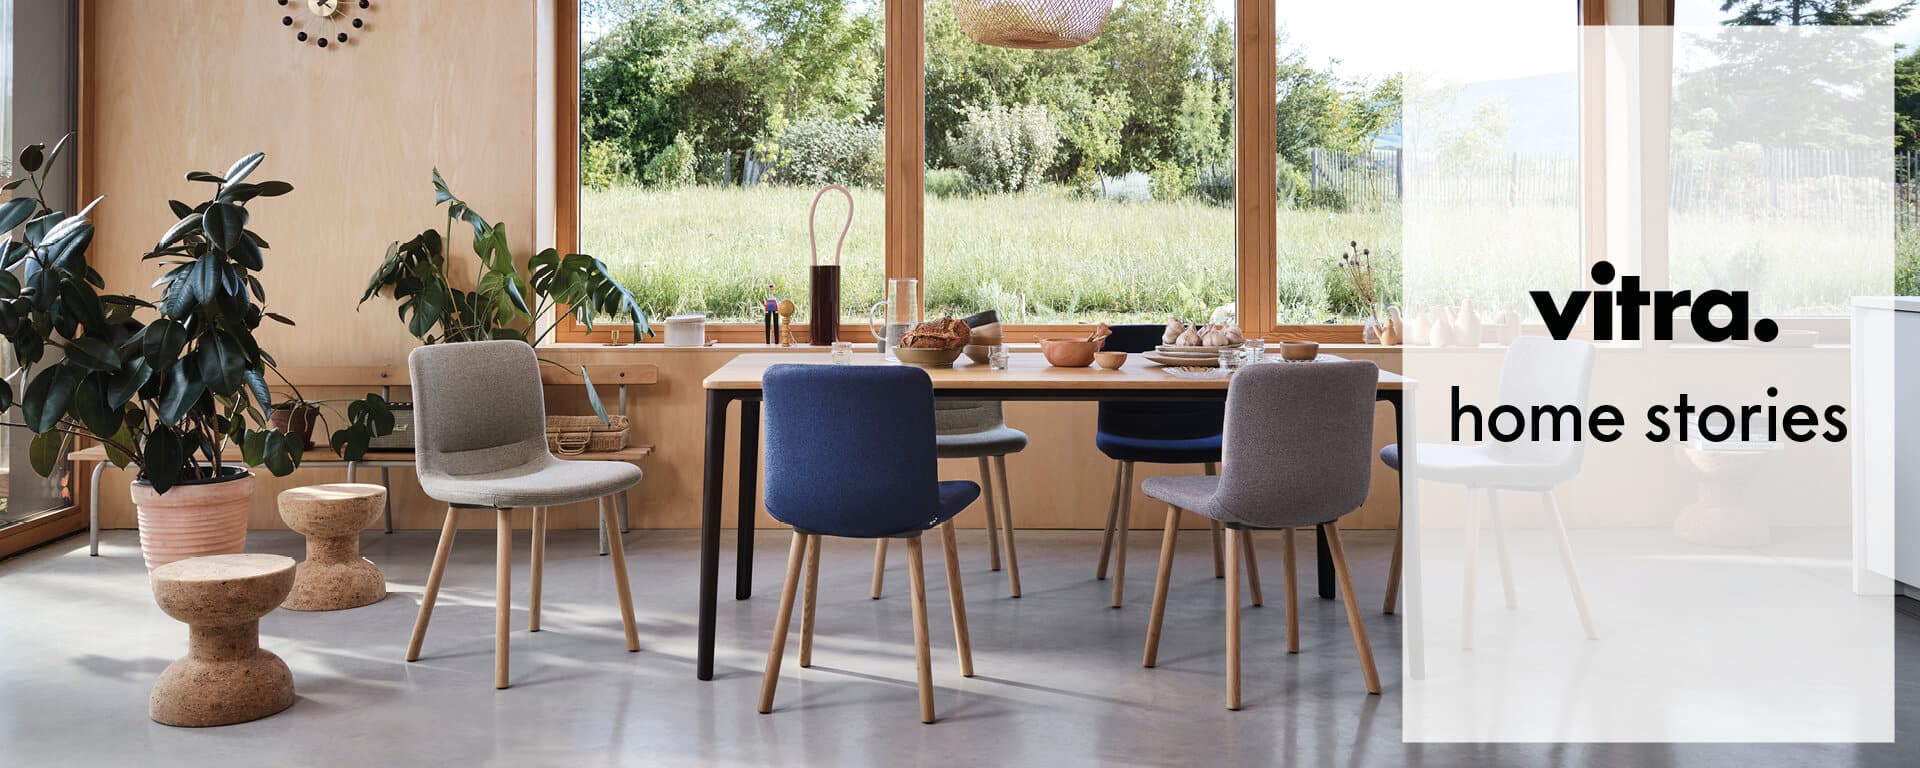 vitra home stories